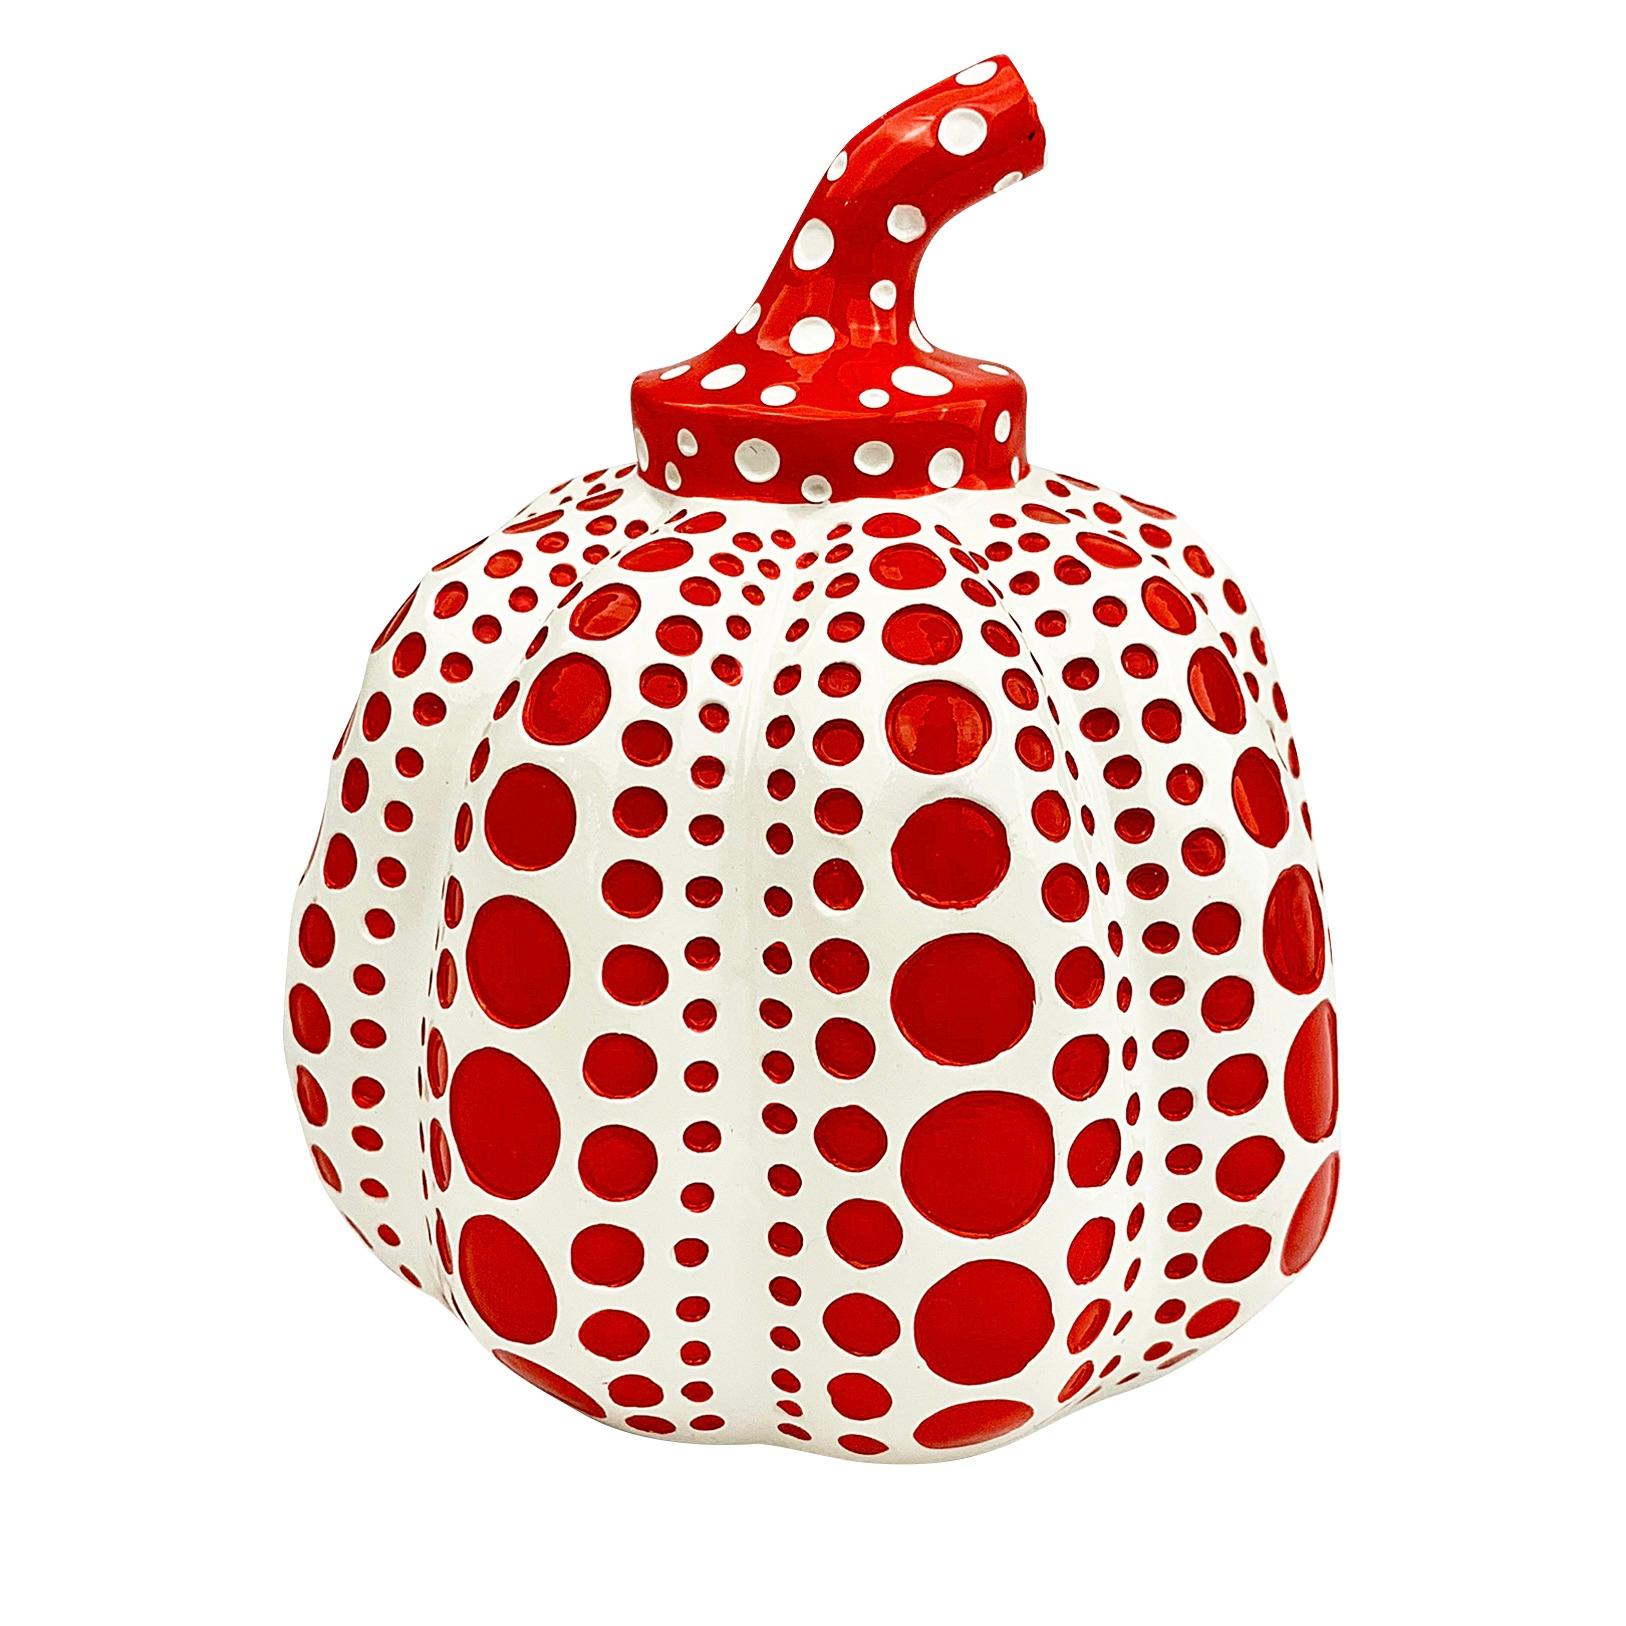 Pumpkins (Yellow & Black & Red & White) Two Painted Sculptures Yayoi Kusama For Sale 3